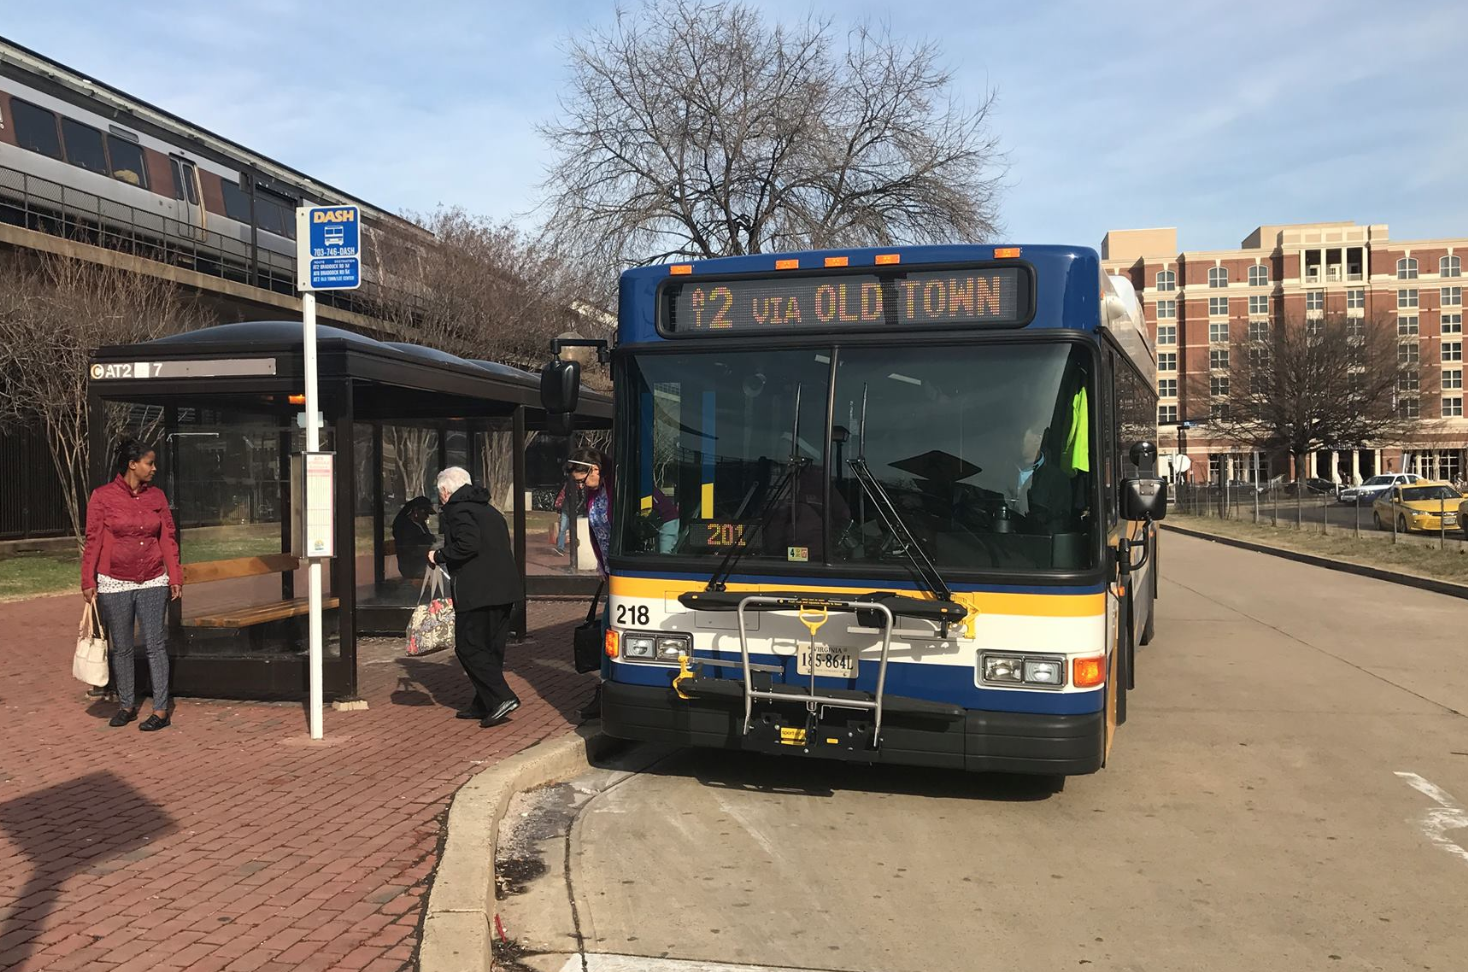 dash bus service: more routes or faster service? - alexandria living